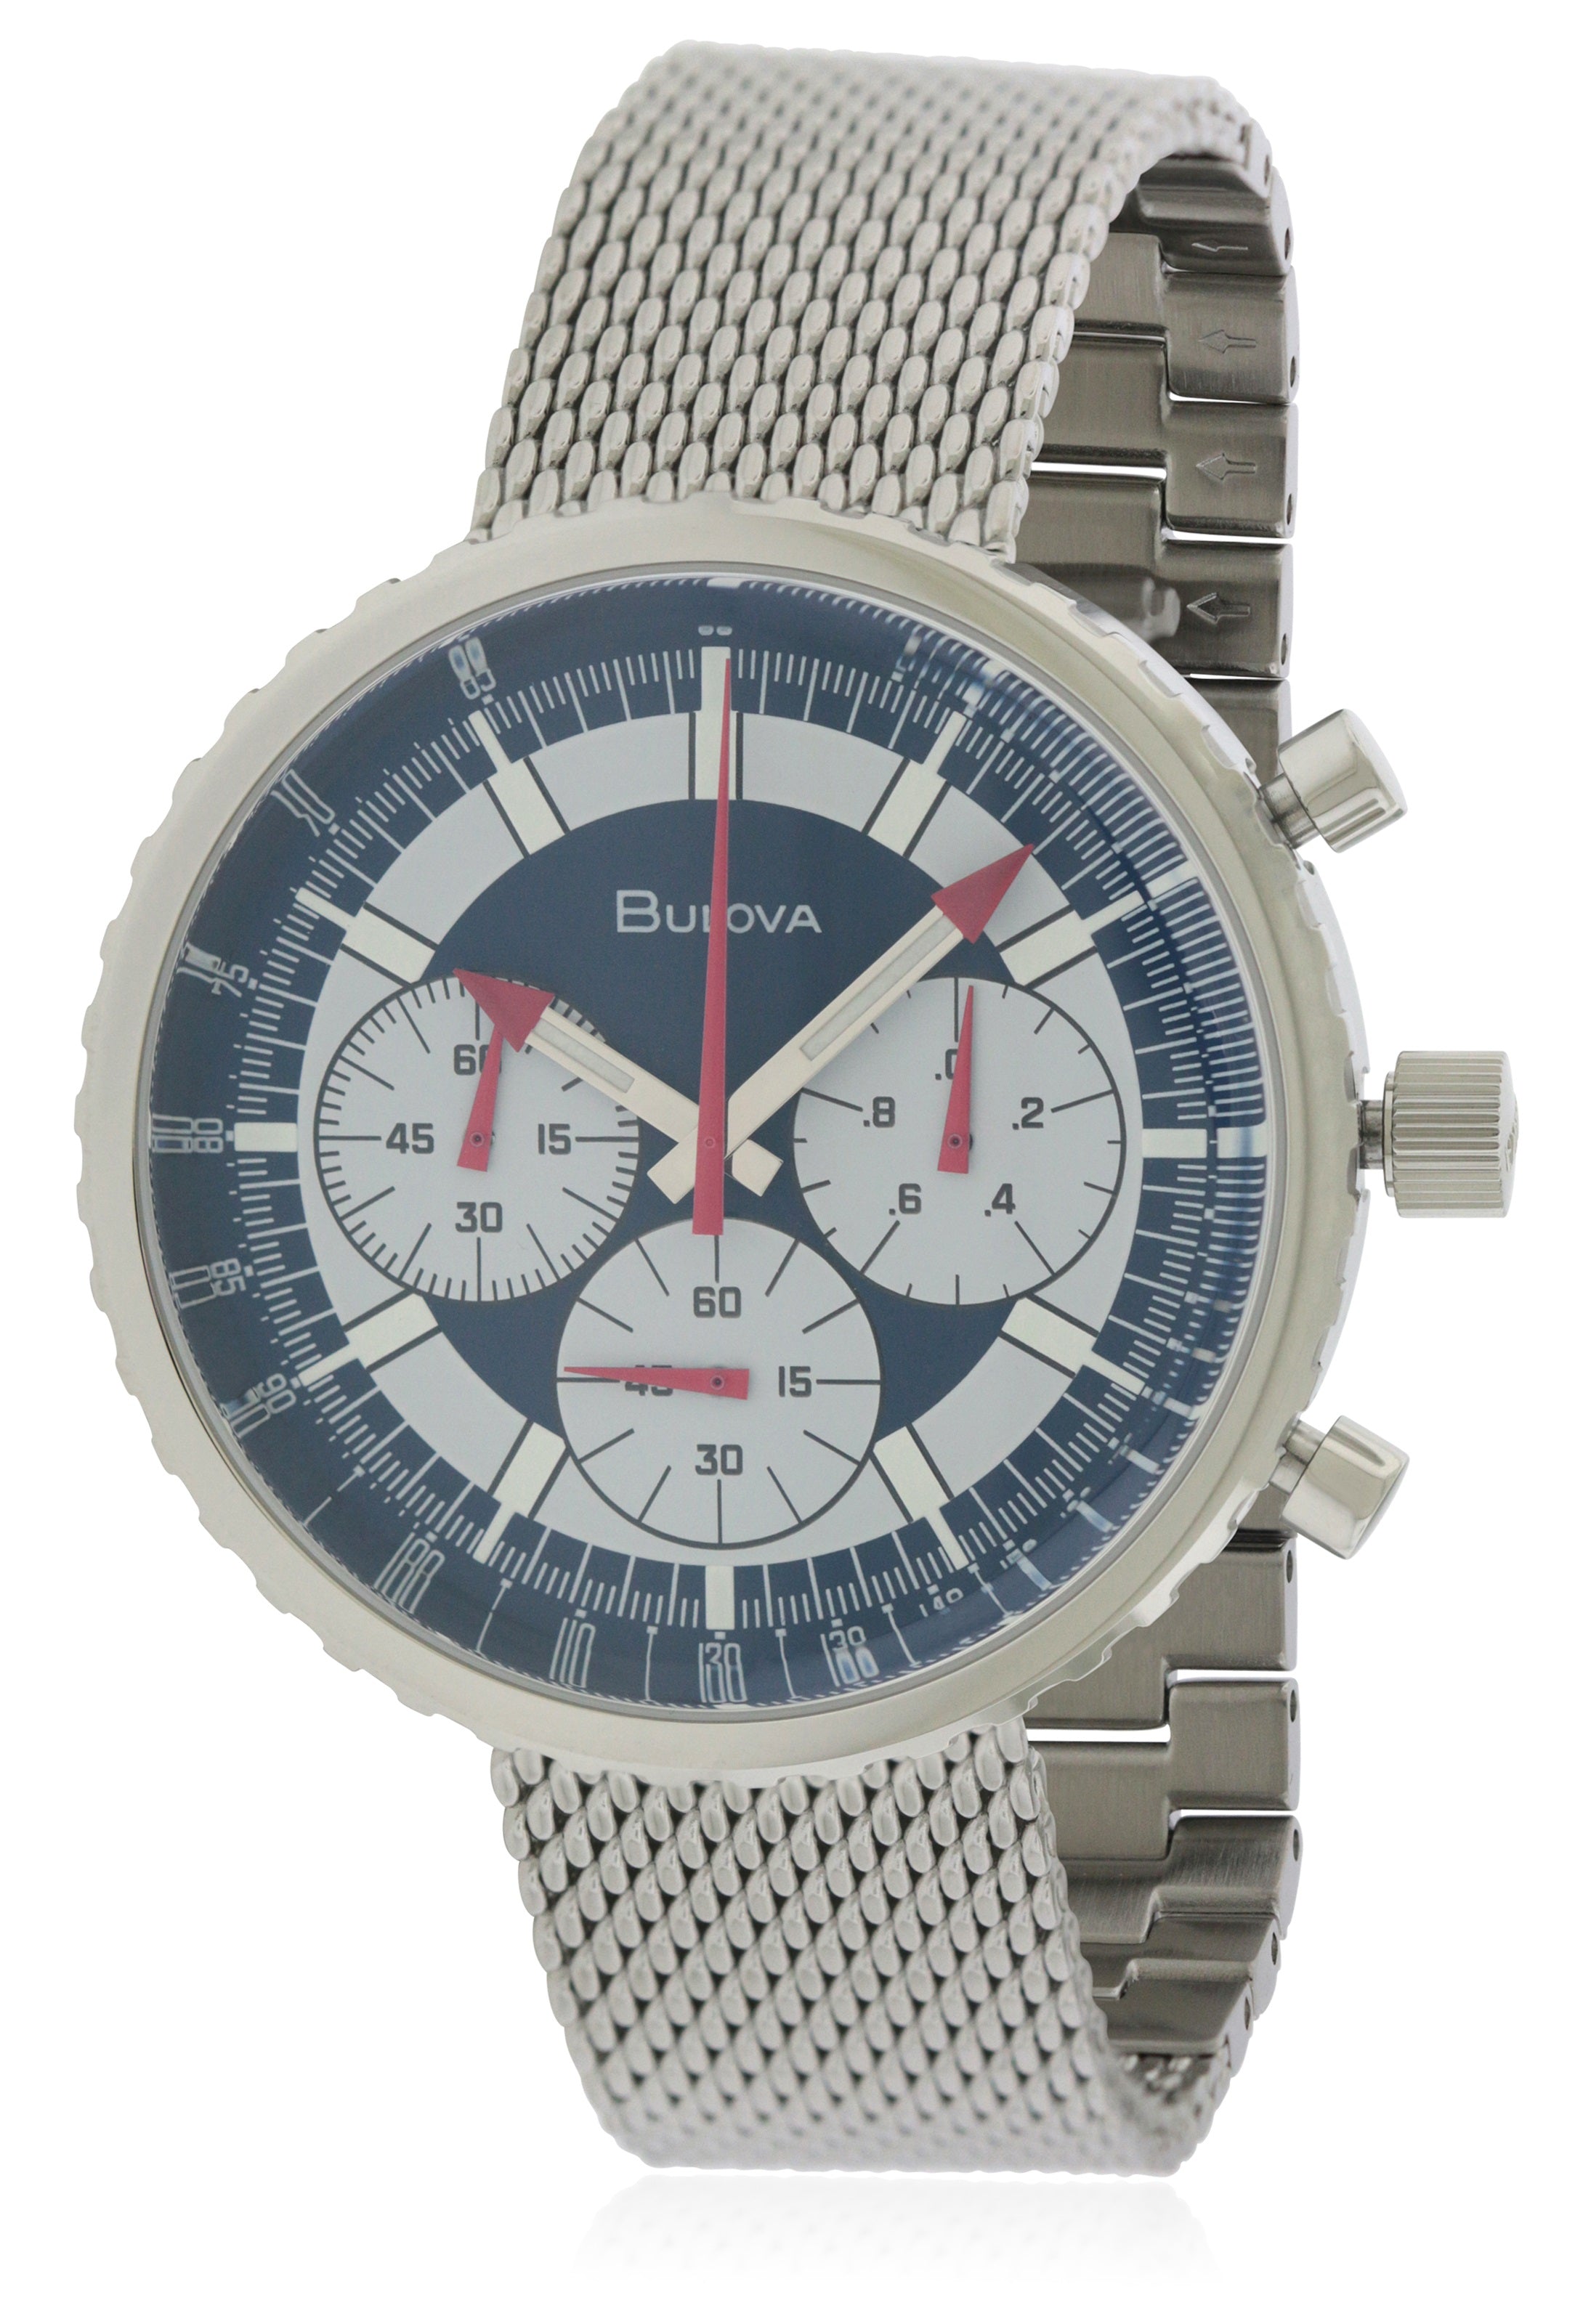 Bulova Archive Chronograph Stainless Steel Mens Watch